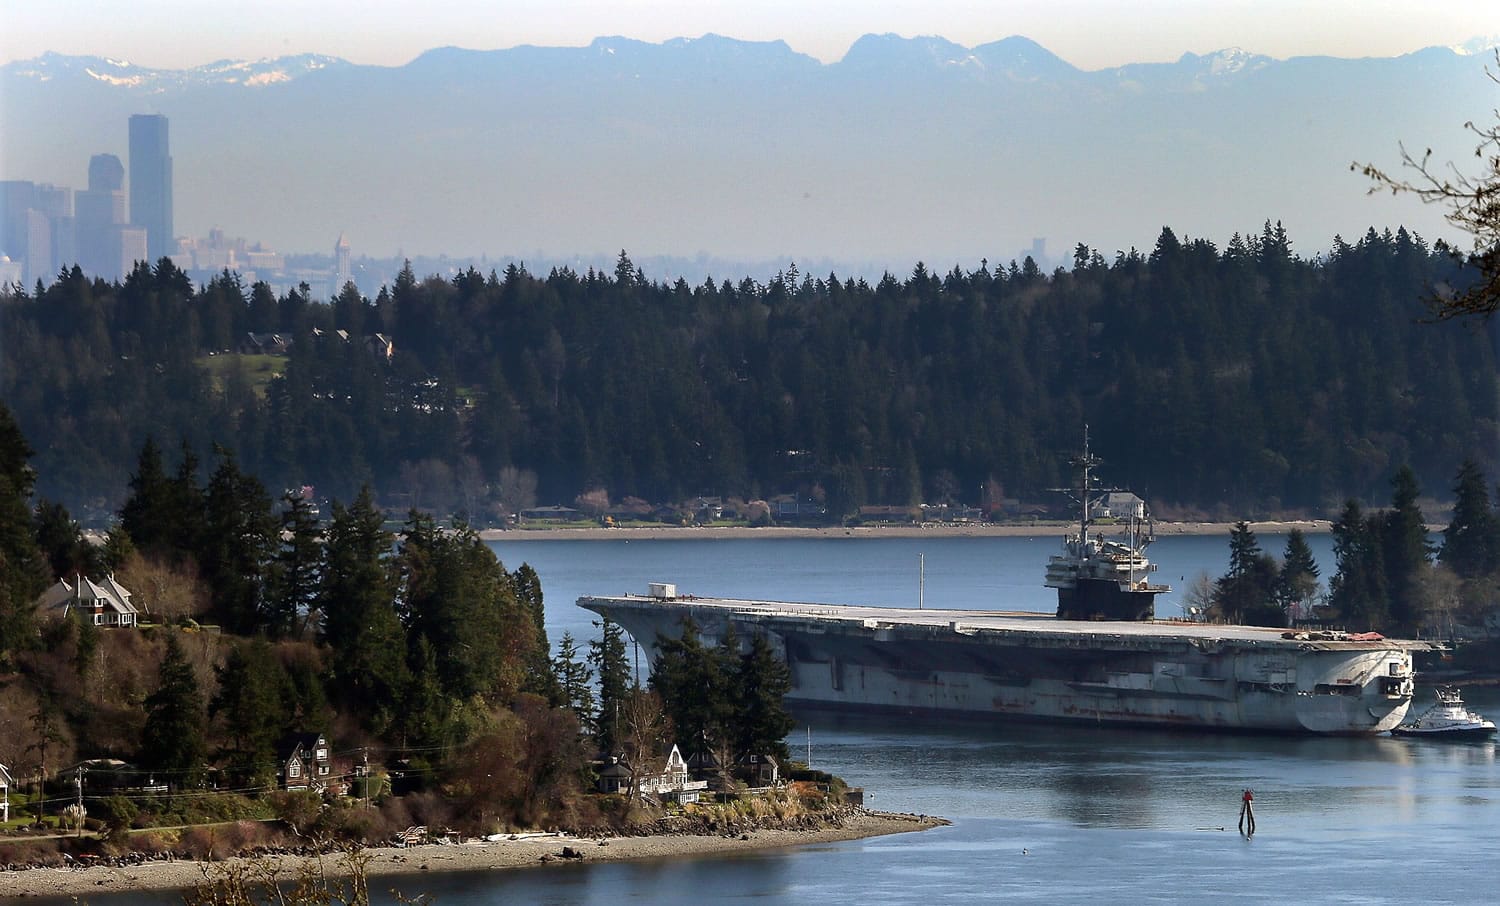 The USS Ranger is towed through Rich Passage in Bremerton for the last time Thursday, as the historic aircraft carrier heads to Brownsville, Texas, to be dismantled.